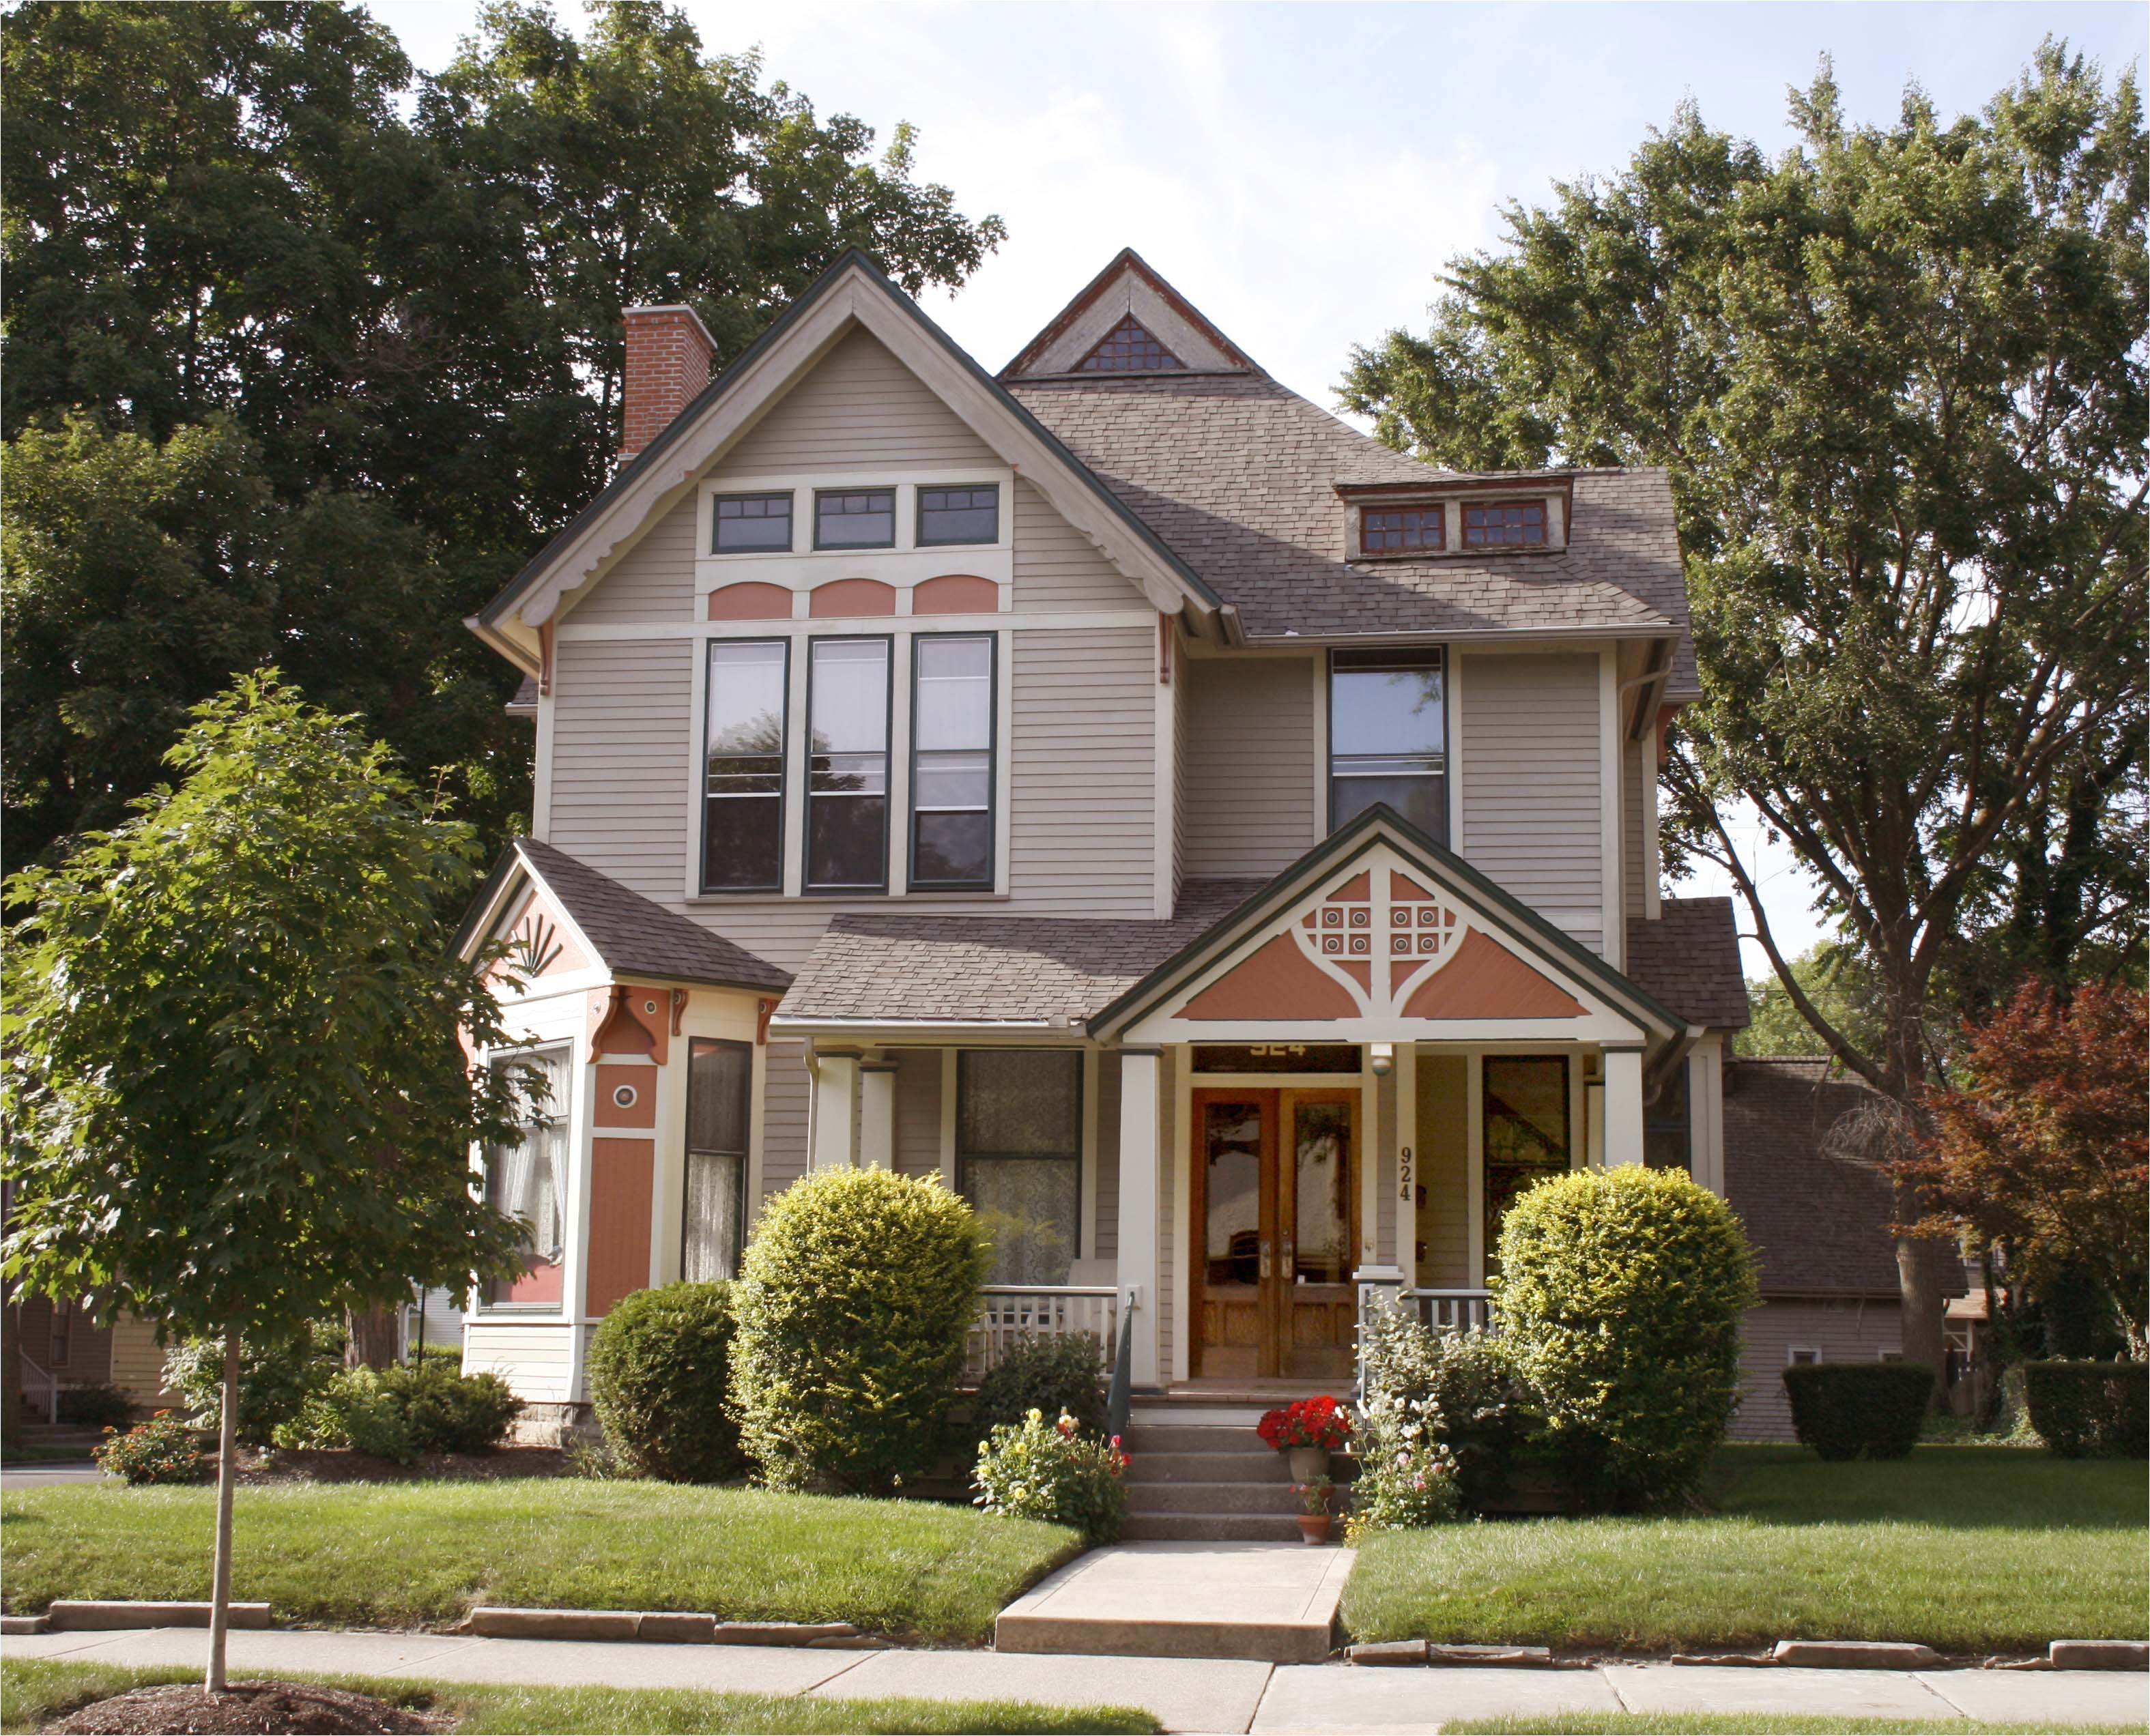 traditional exterior classic american style home design